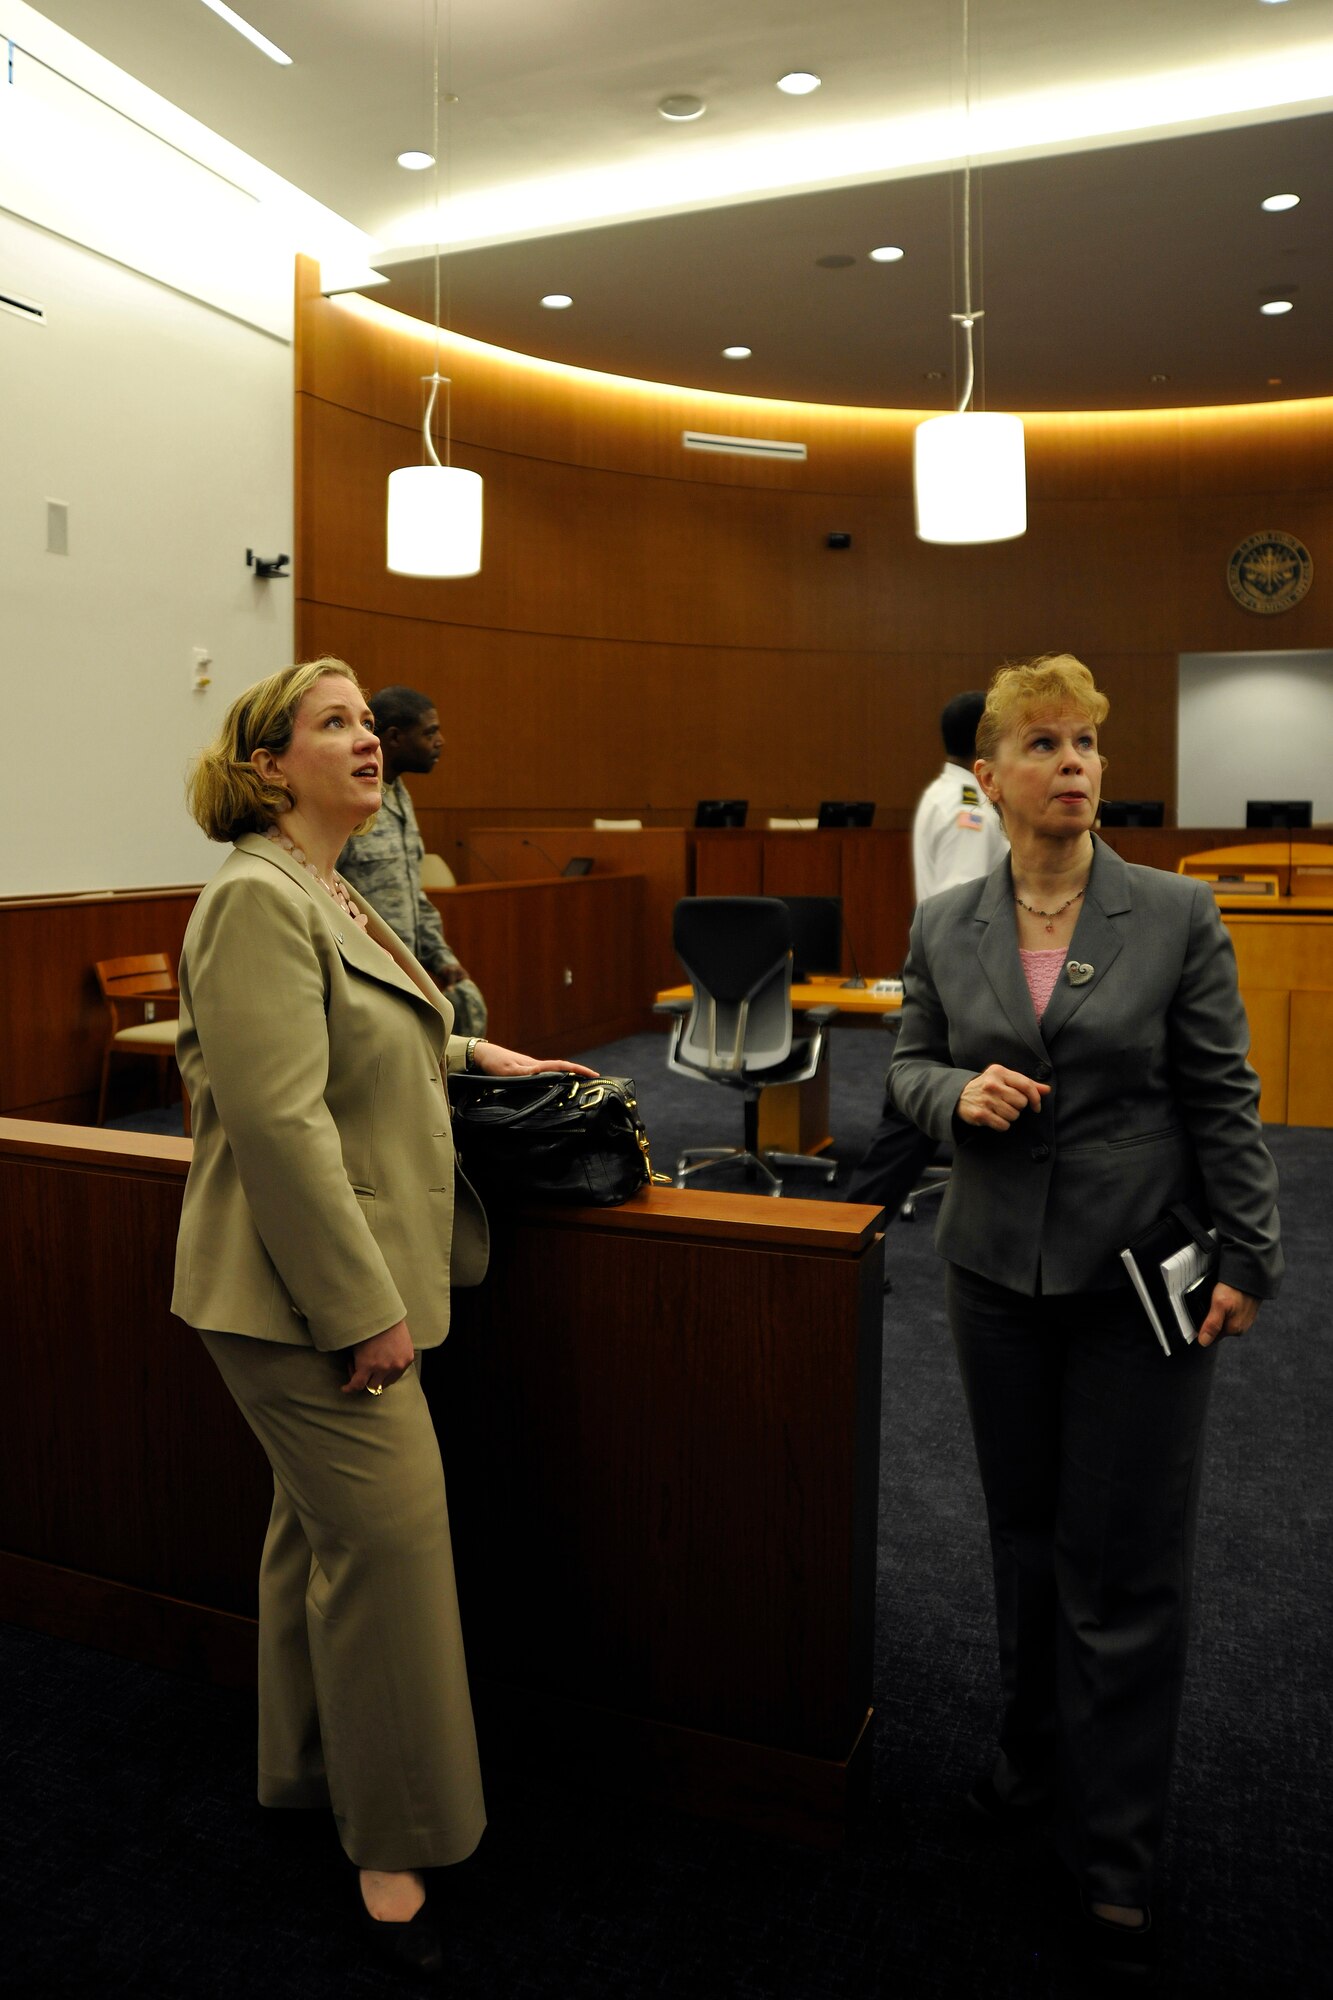 Susan Bench-Snow, Secretary of the Air Force Administrative Assistant Facilities director, shows Under Secretary of the Air Force Erin Conaton the new appellate court room inside the William A. Jones III Building, following an Earth Day and Arbor Day tree planting ceremony at Joint Base Andrews, Md., April 20, 2011. The building features two court rooms, one for base legal services and the other for Air Force appeals. (U.S. Air Force photo/ Senior Airman Melissa V. Brownstein)